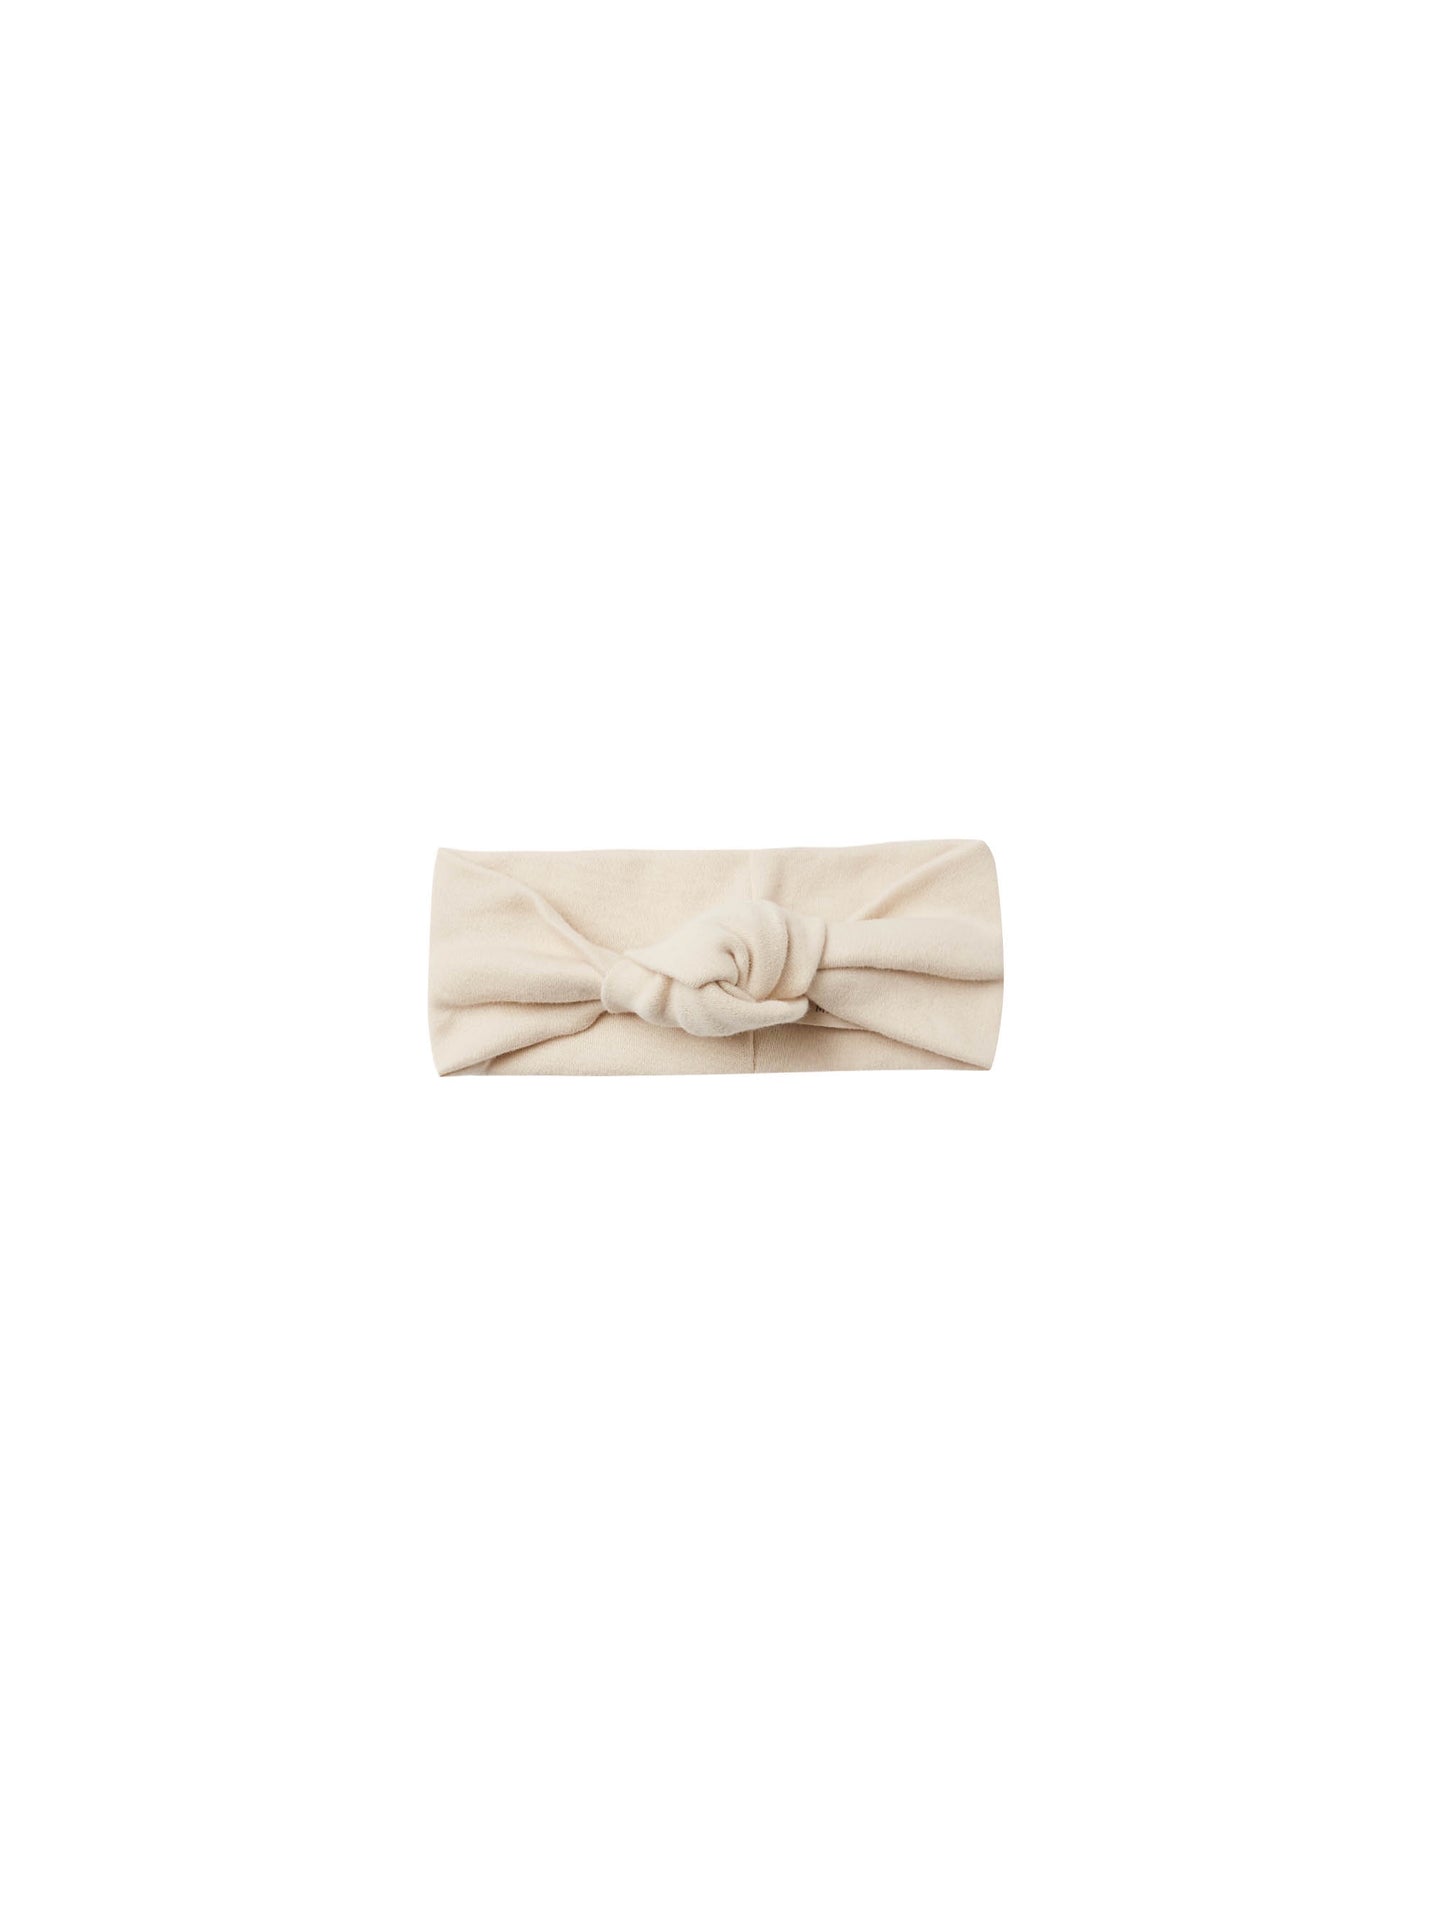 Quincy Mae - Knotted Headband - Natural